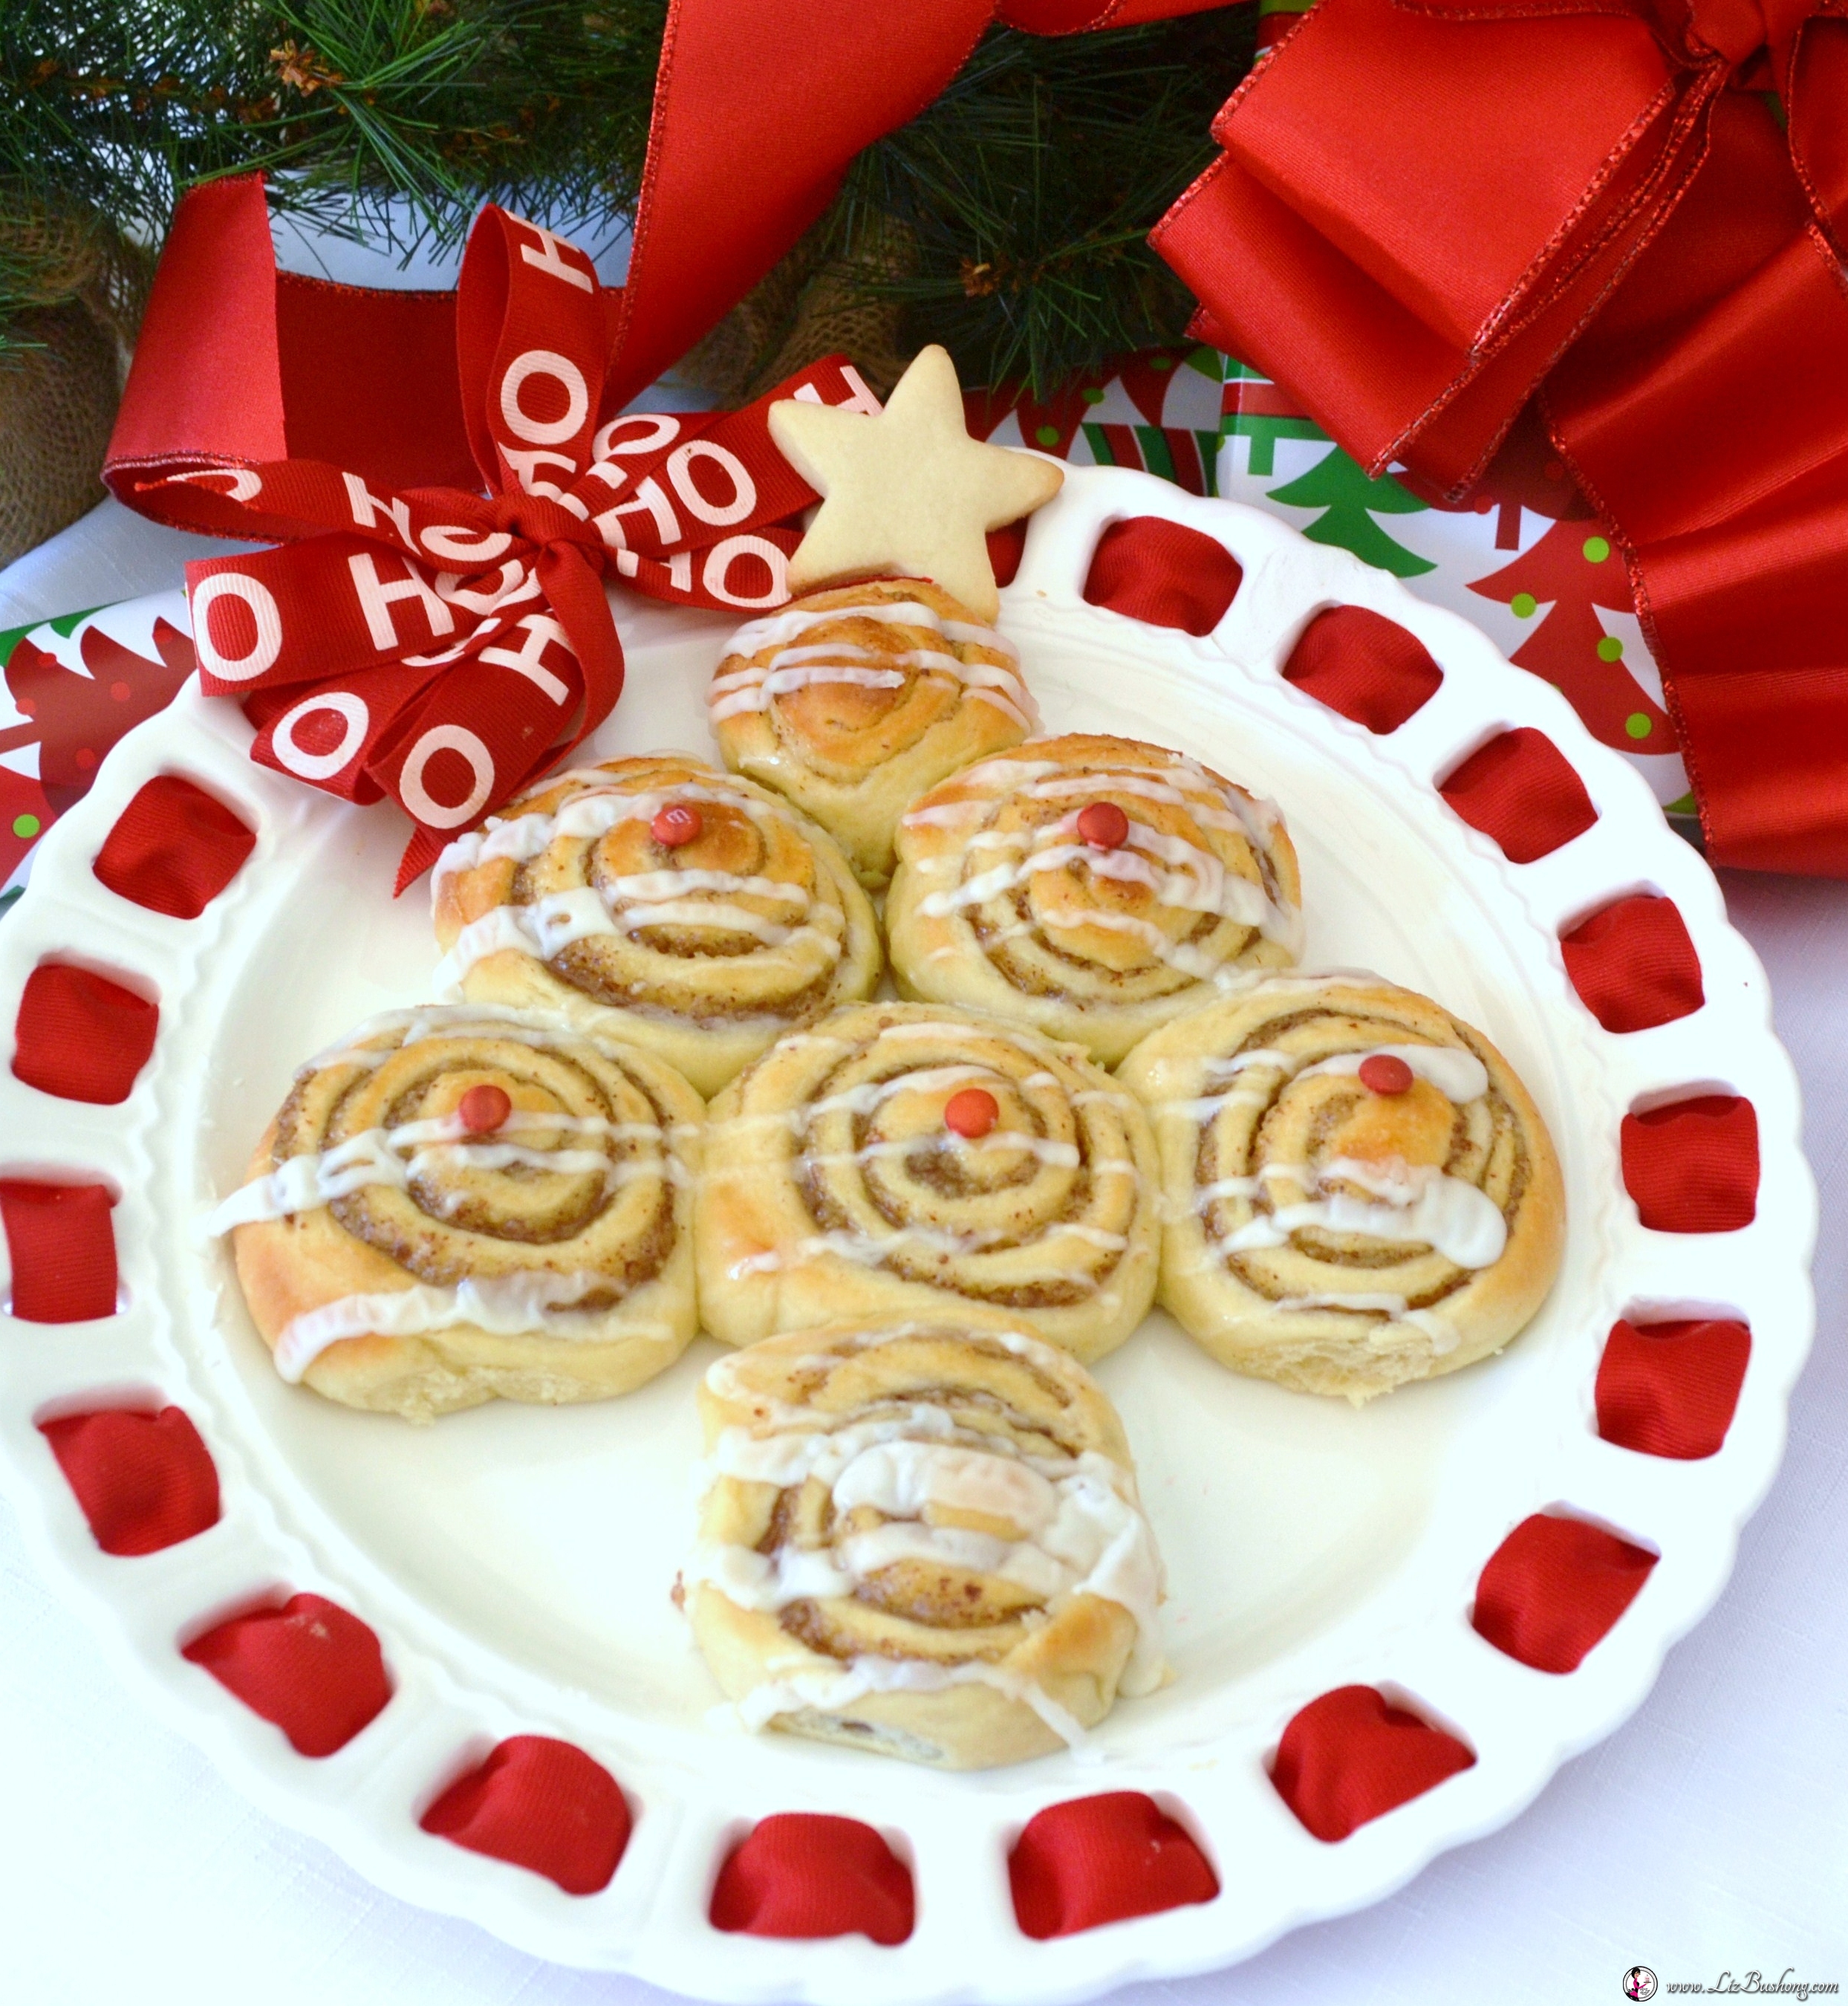 How to make Almond Yeast Sweet Rolls Just in the nIck of time for Christmas gift giving.